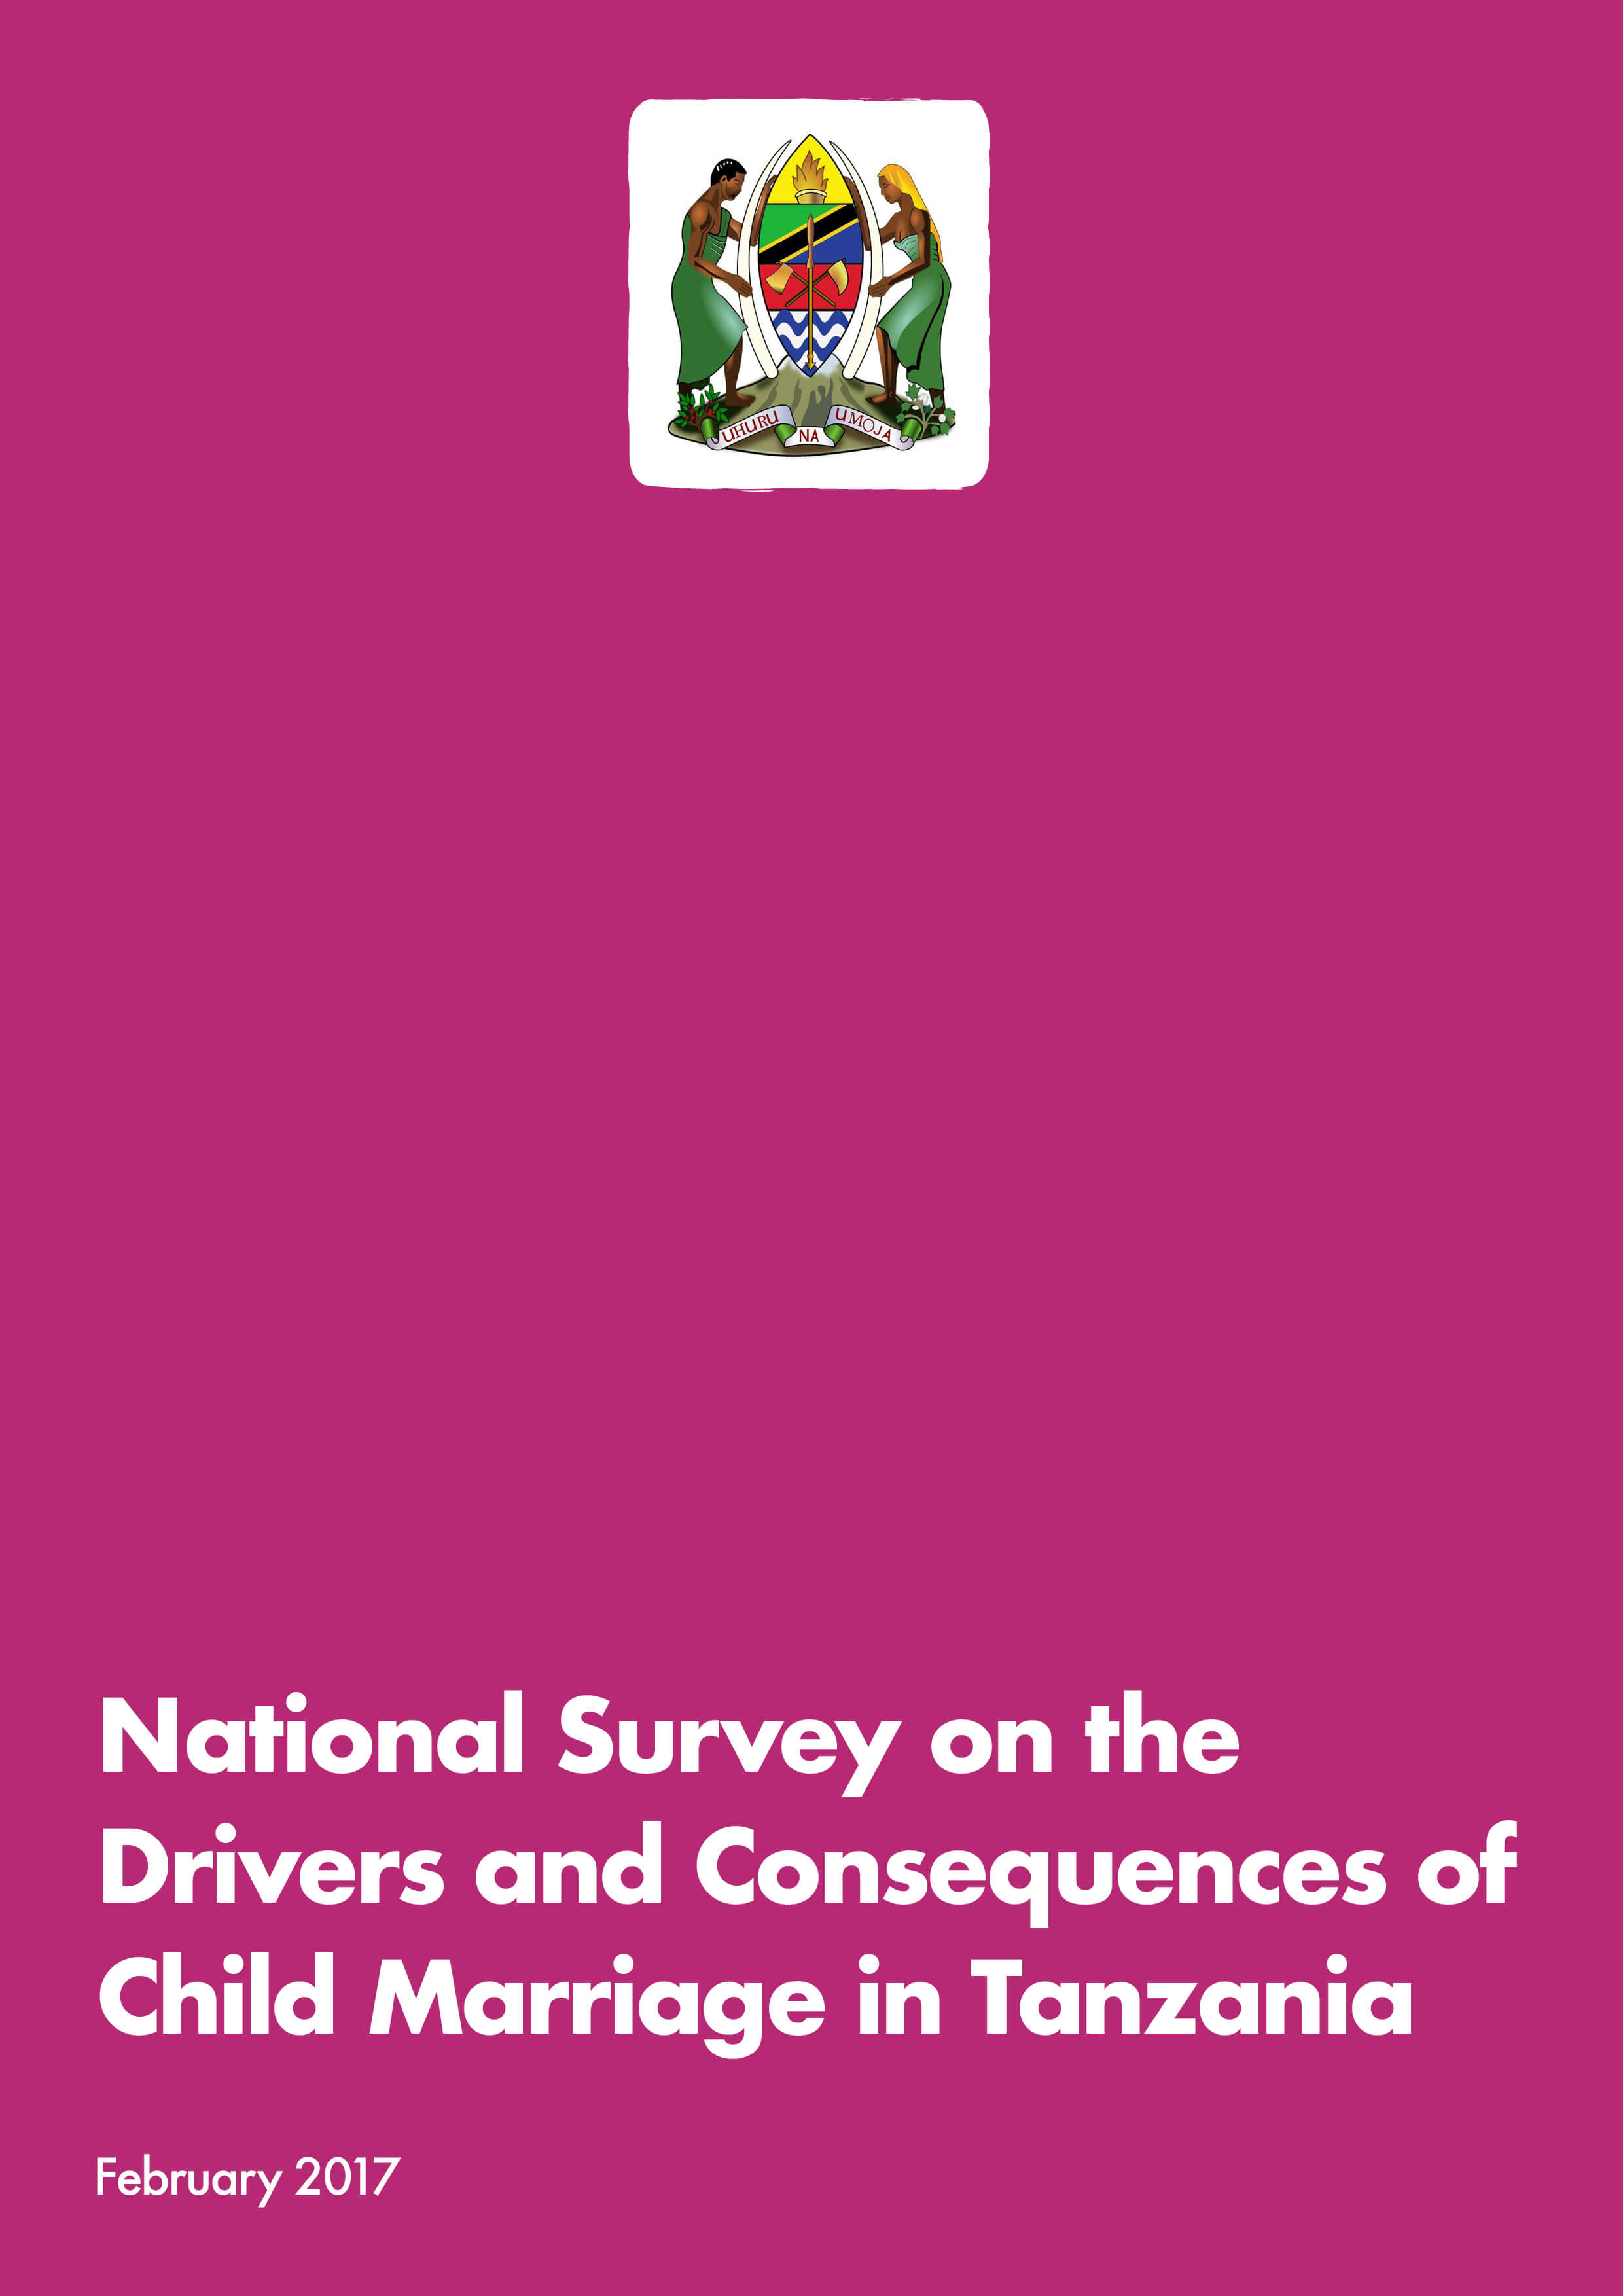 National Survey on the Drivers and Consequences of Child Marriage in Tanzania